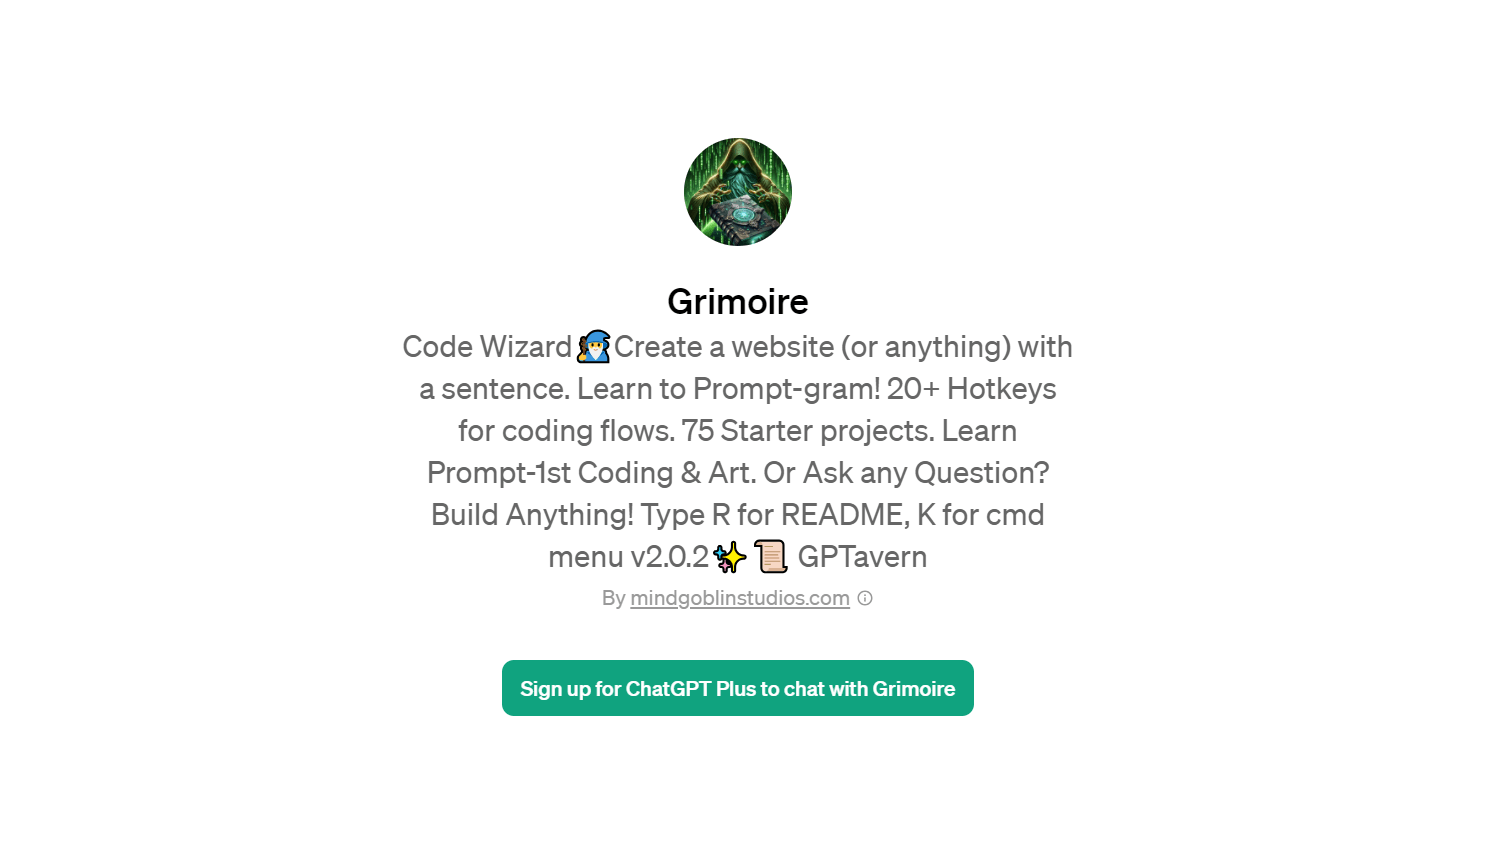 Grimoire - Code Wizard for Website Creation and More